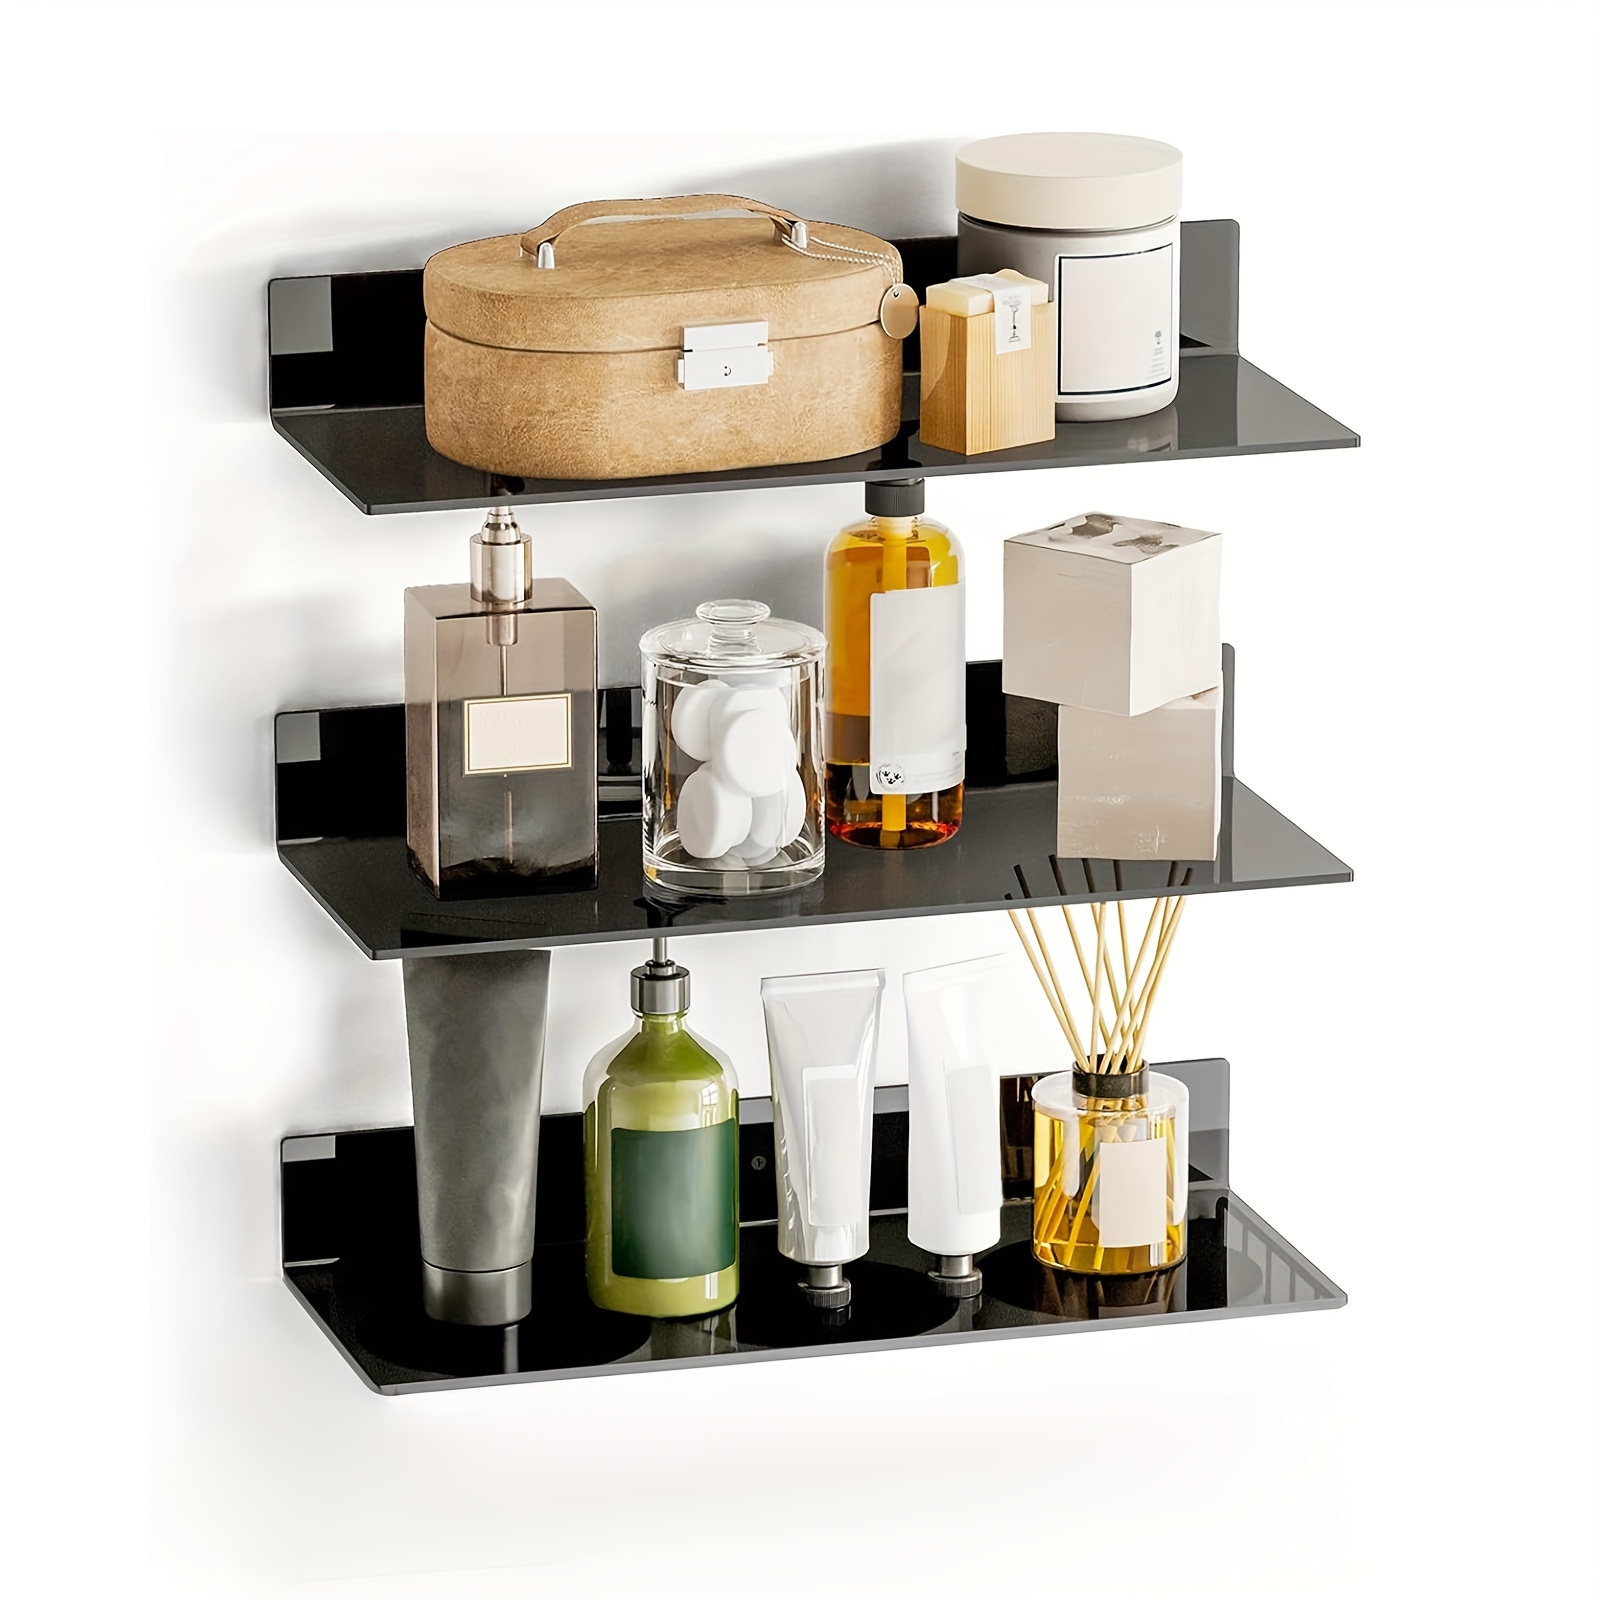 

3+1 Tier , 15x5.9in Floating Wall Mounted Shelves, Bathroom Shelves Over Toilet With Wire Storage Basket, Help You Store Skin Care Products And Other Items (black)